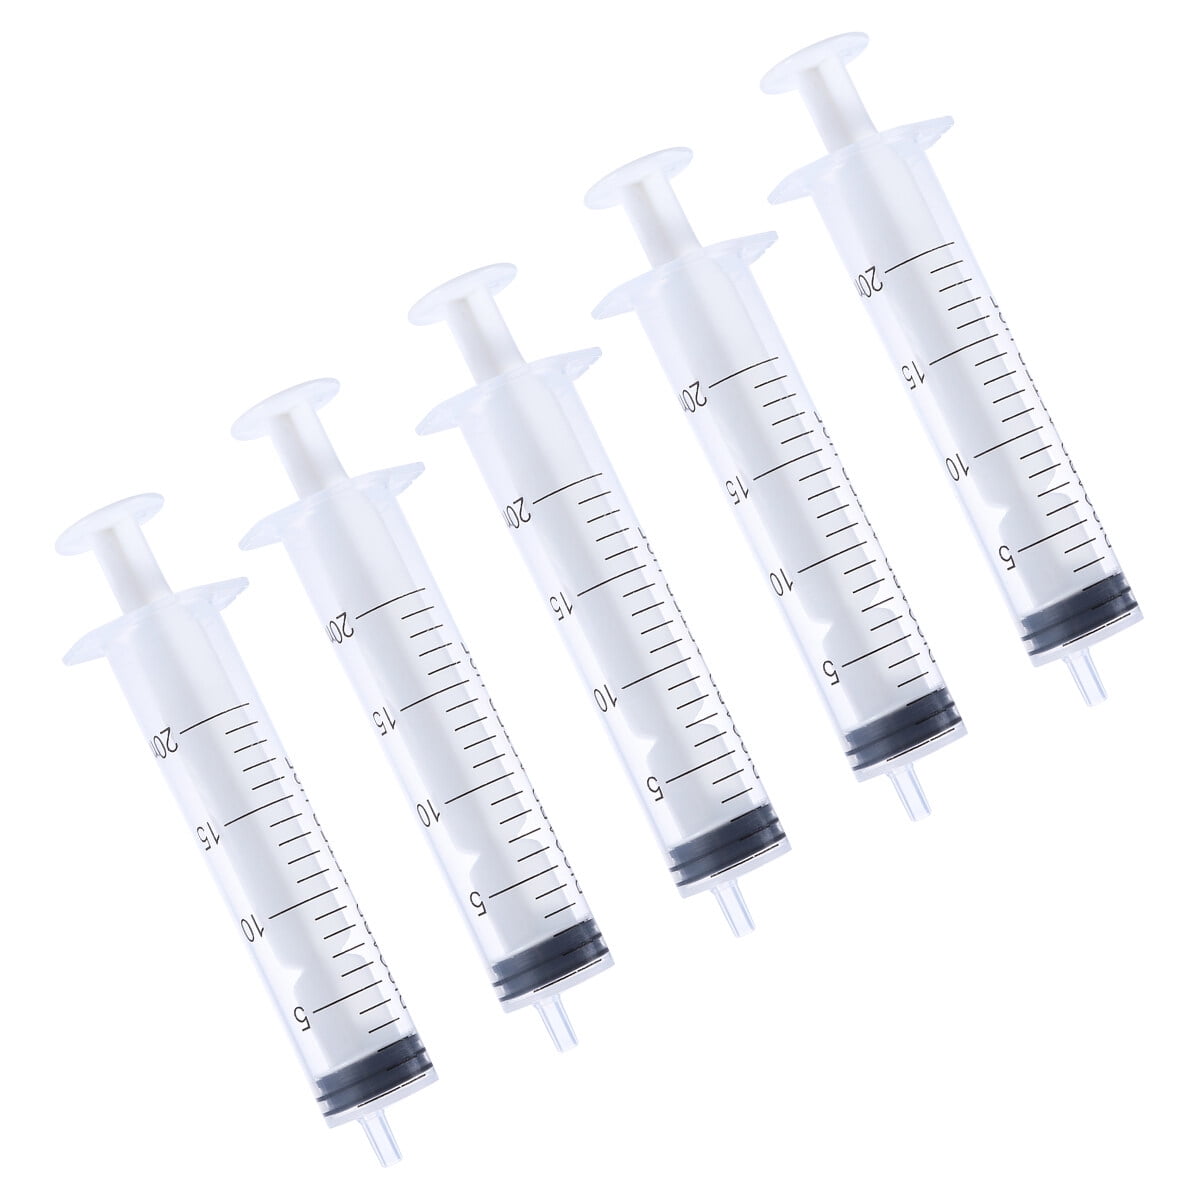 Luer Lock Syringe Assortment Caps and Dispensing Tips Adhesives Glue Crafts  Hobby Pack of 8